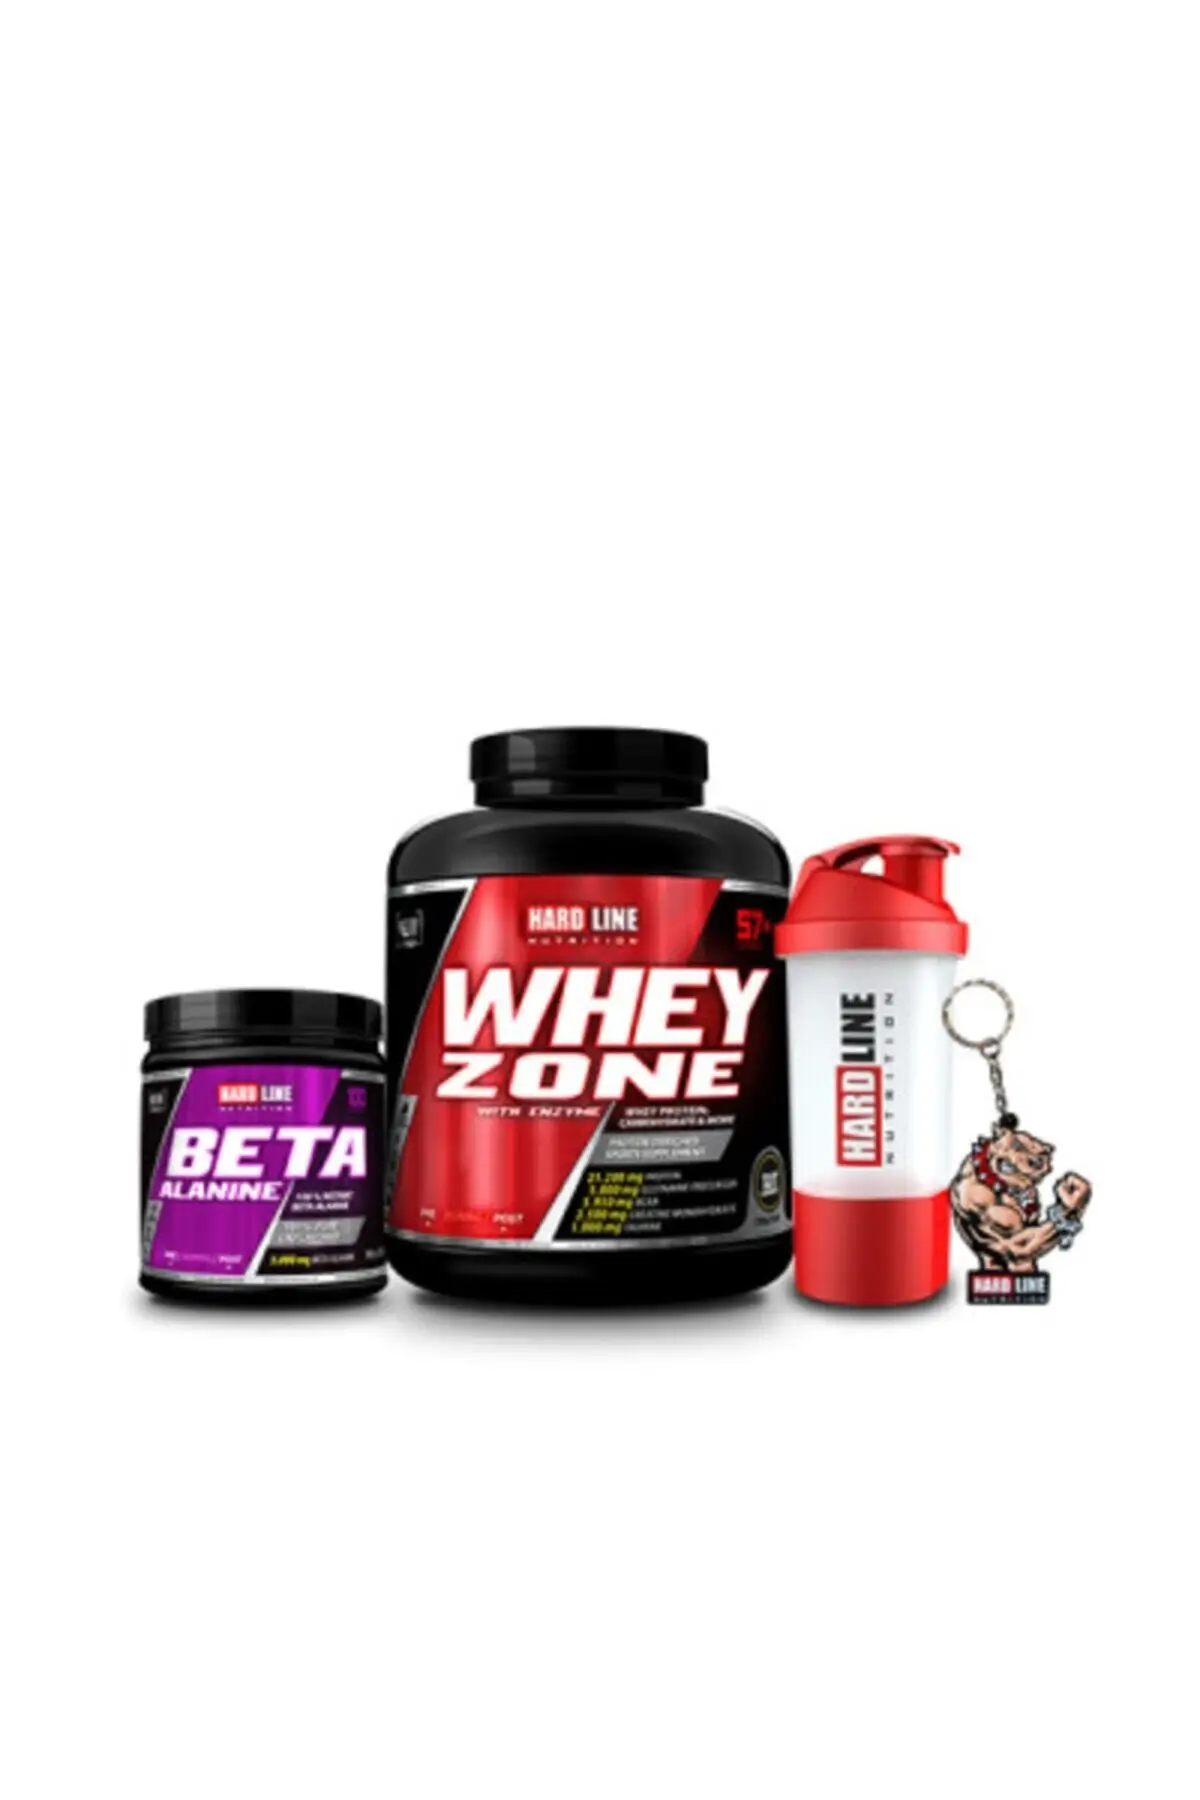 

Whey Zone 2300 G Beta Alanine Is Combination of 300 g